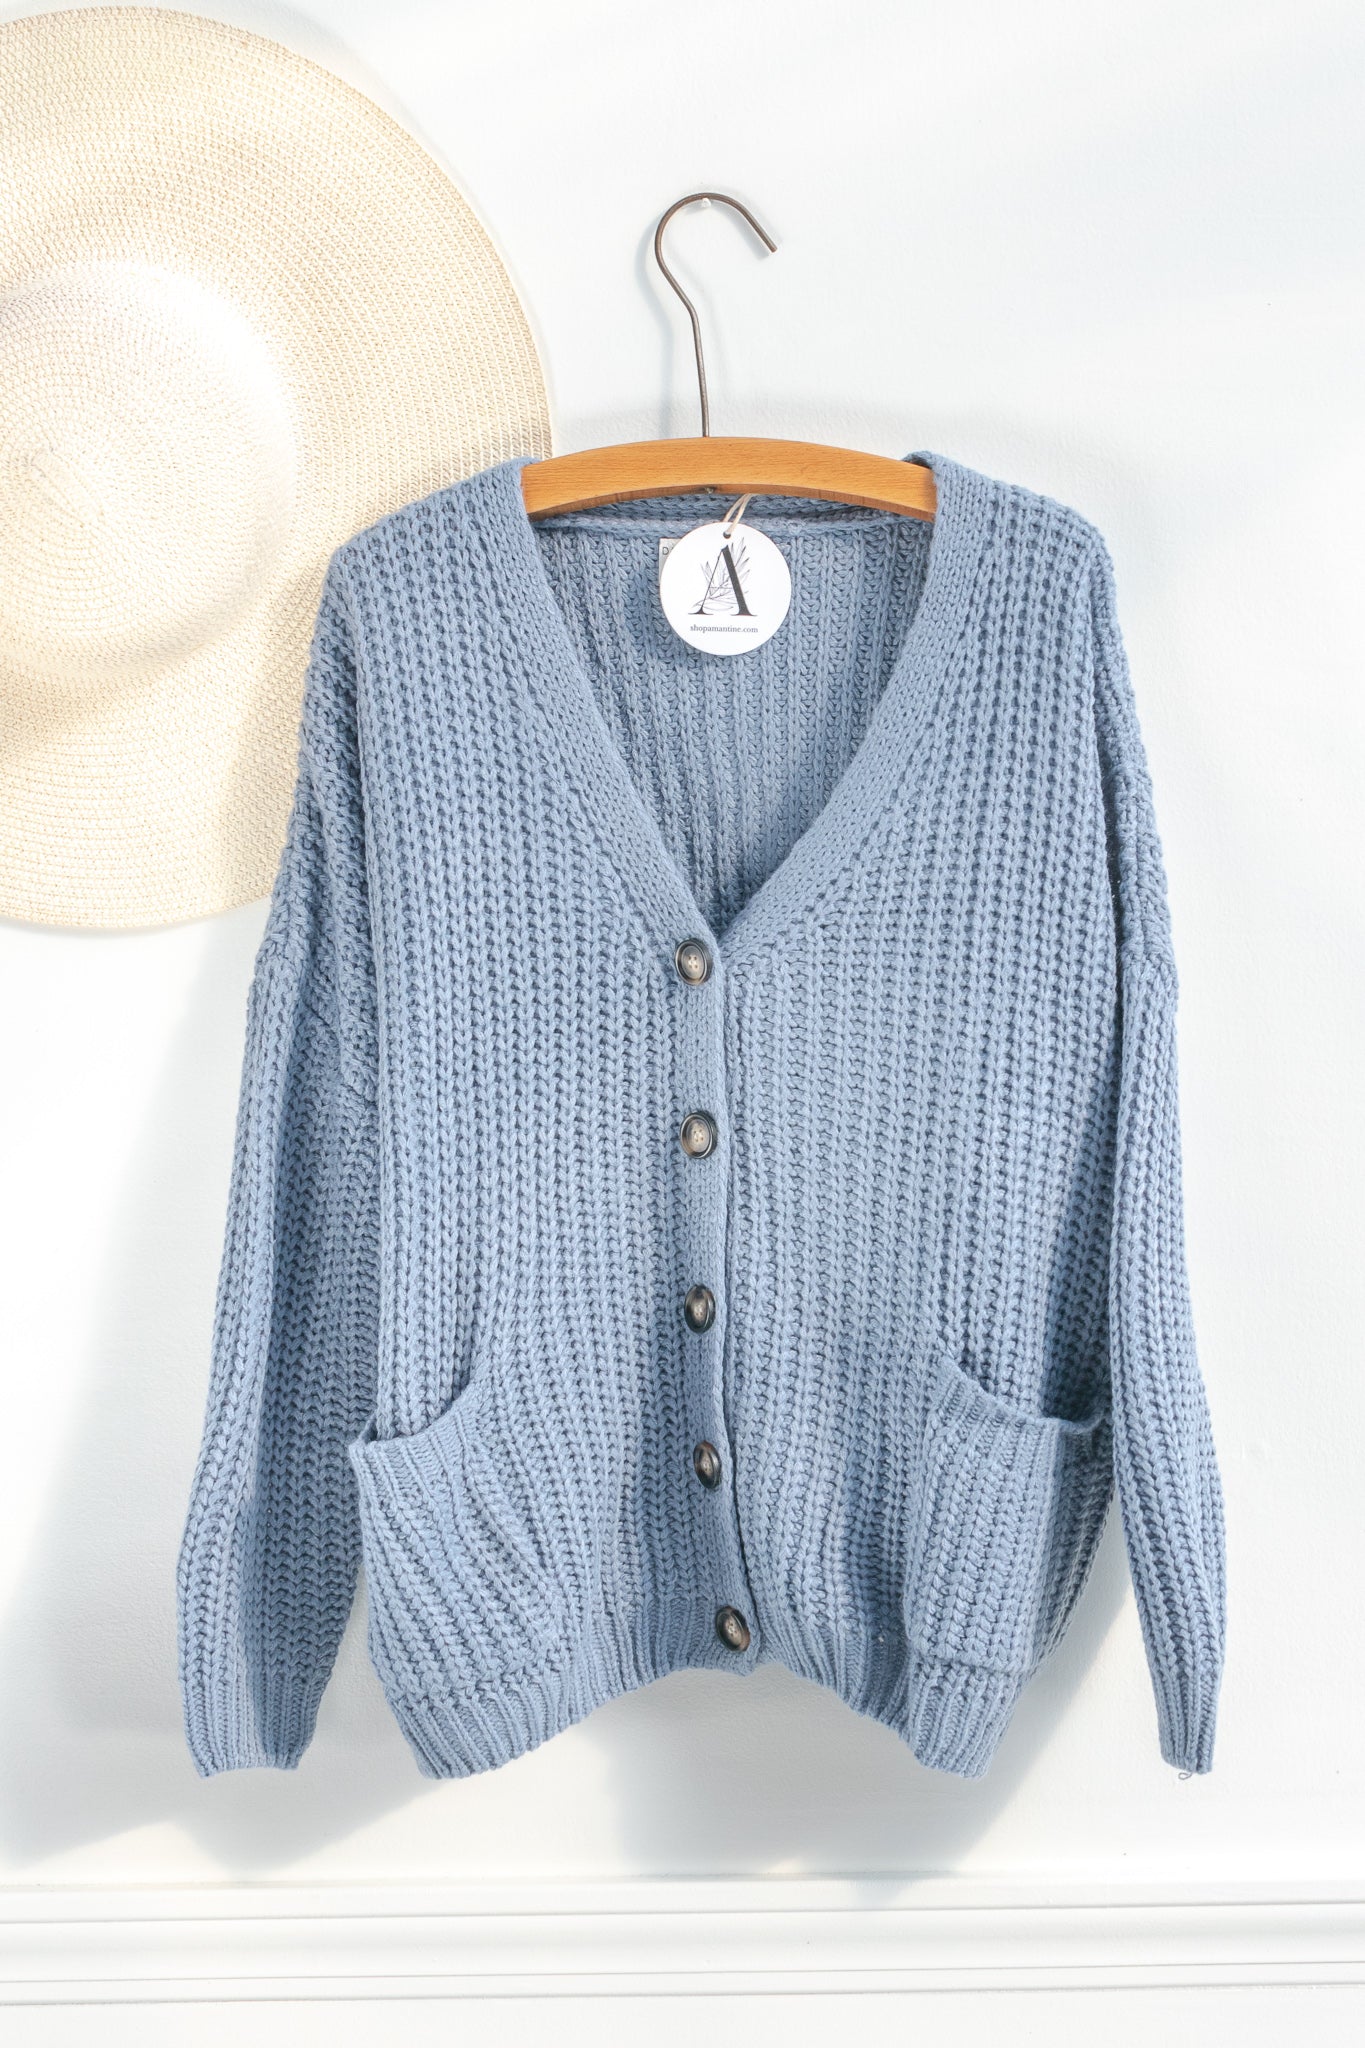 In the - Vintage Cardigan Amantine Style French – Women\'s Fashion and Clouds